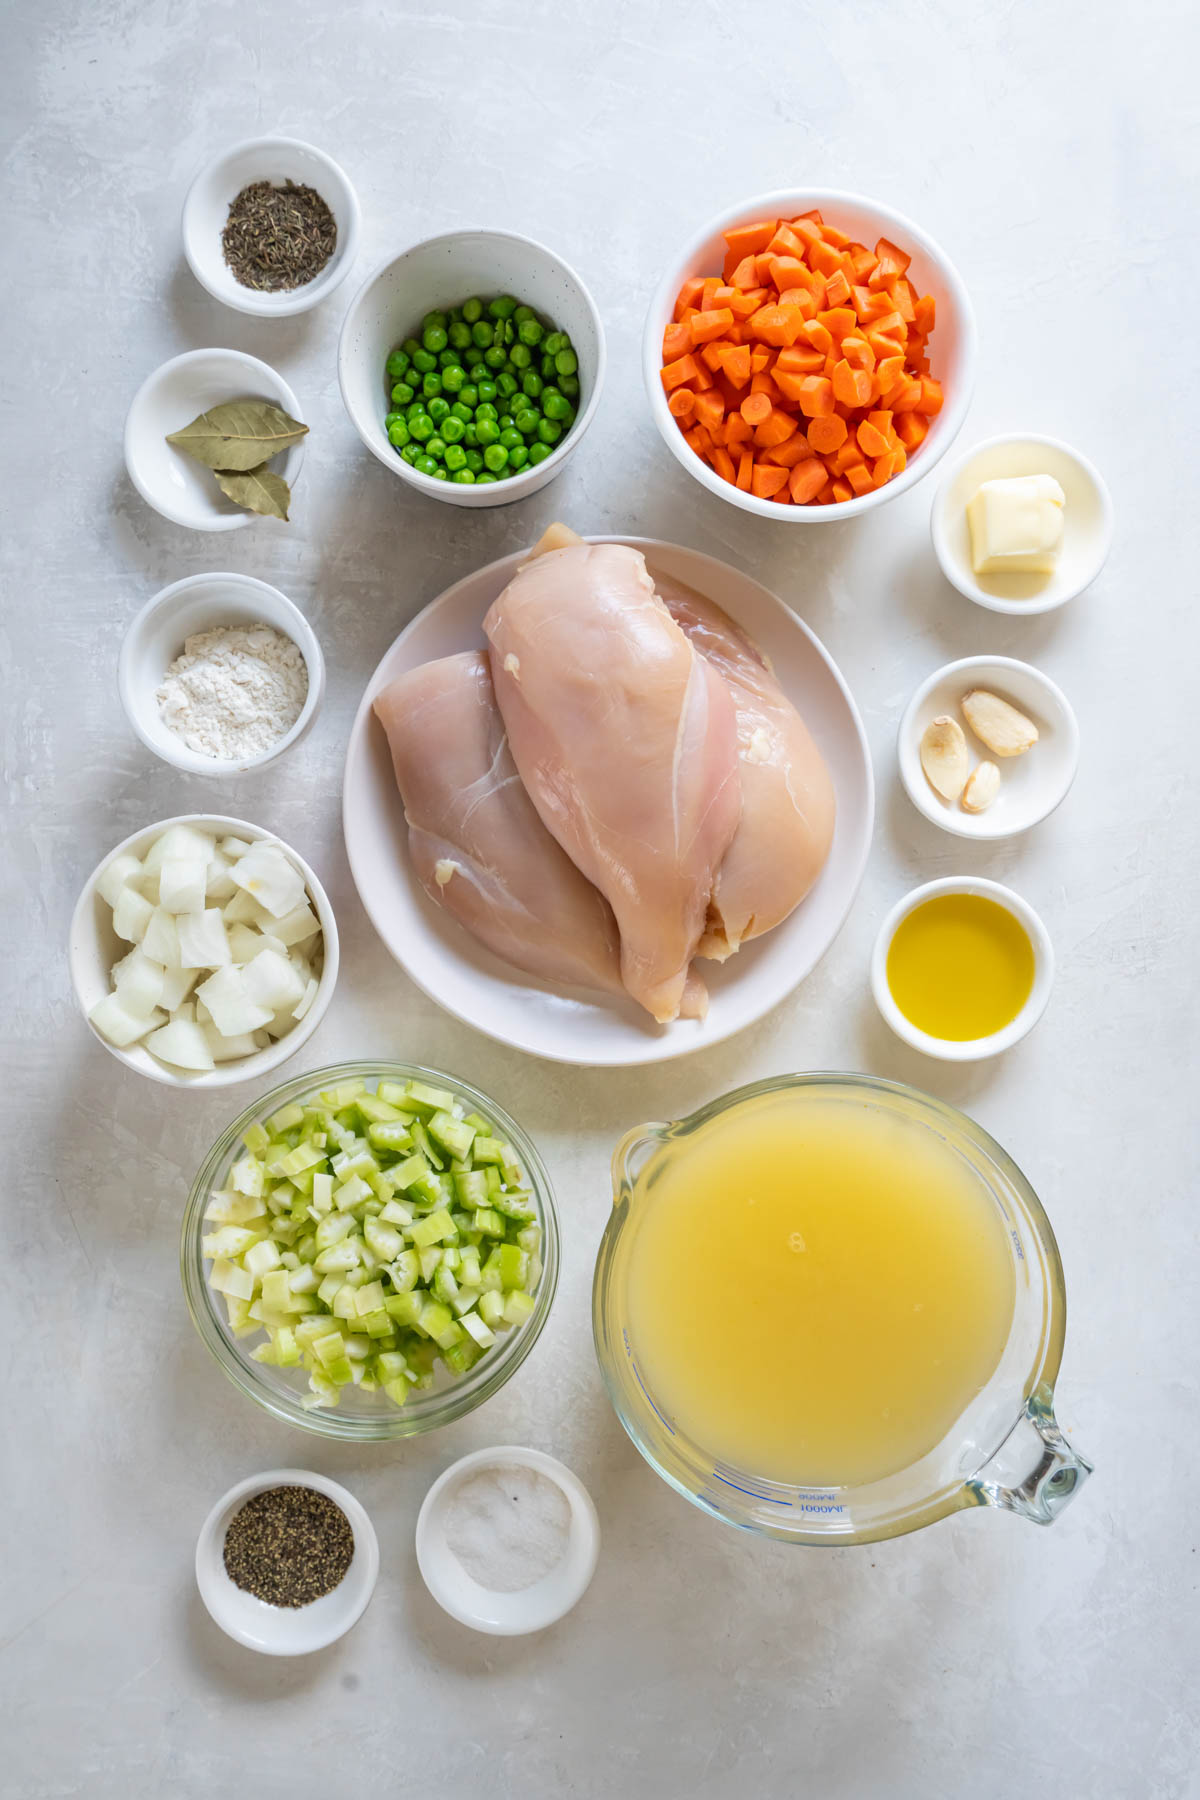 Ingredients for chicken and dumplings recipe.